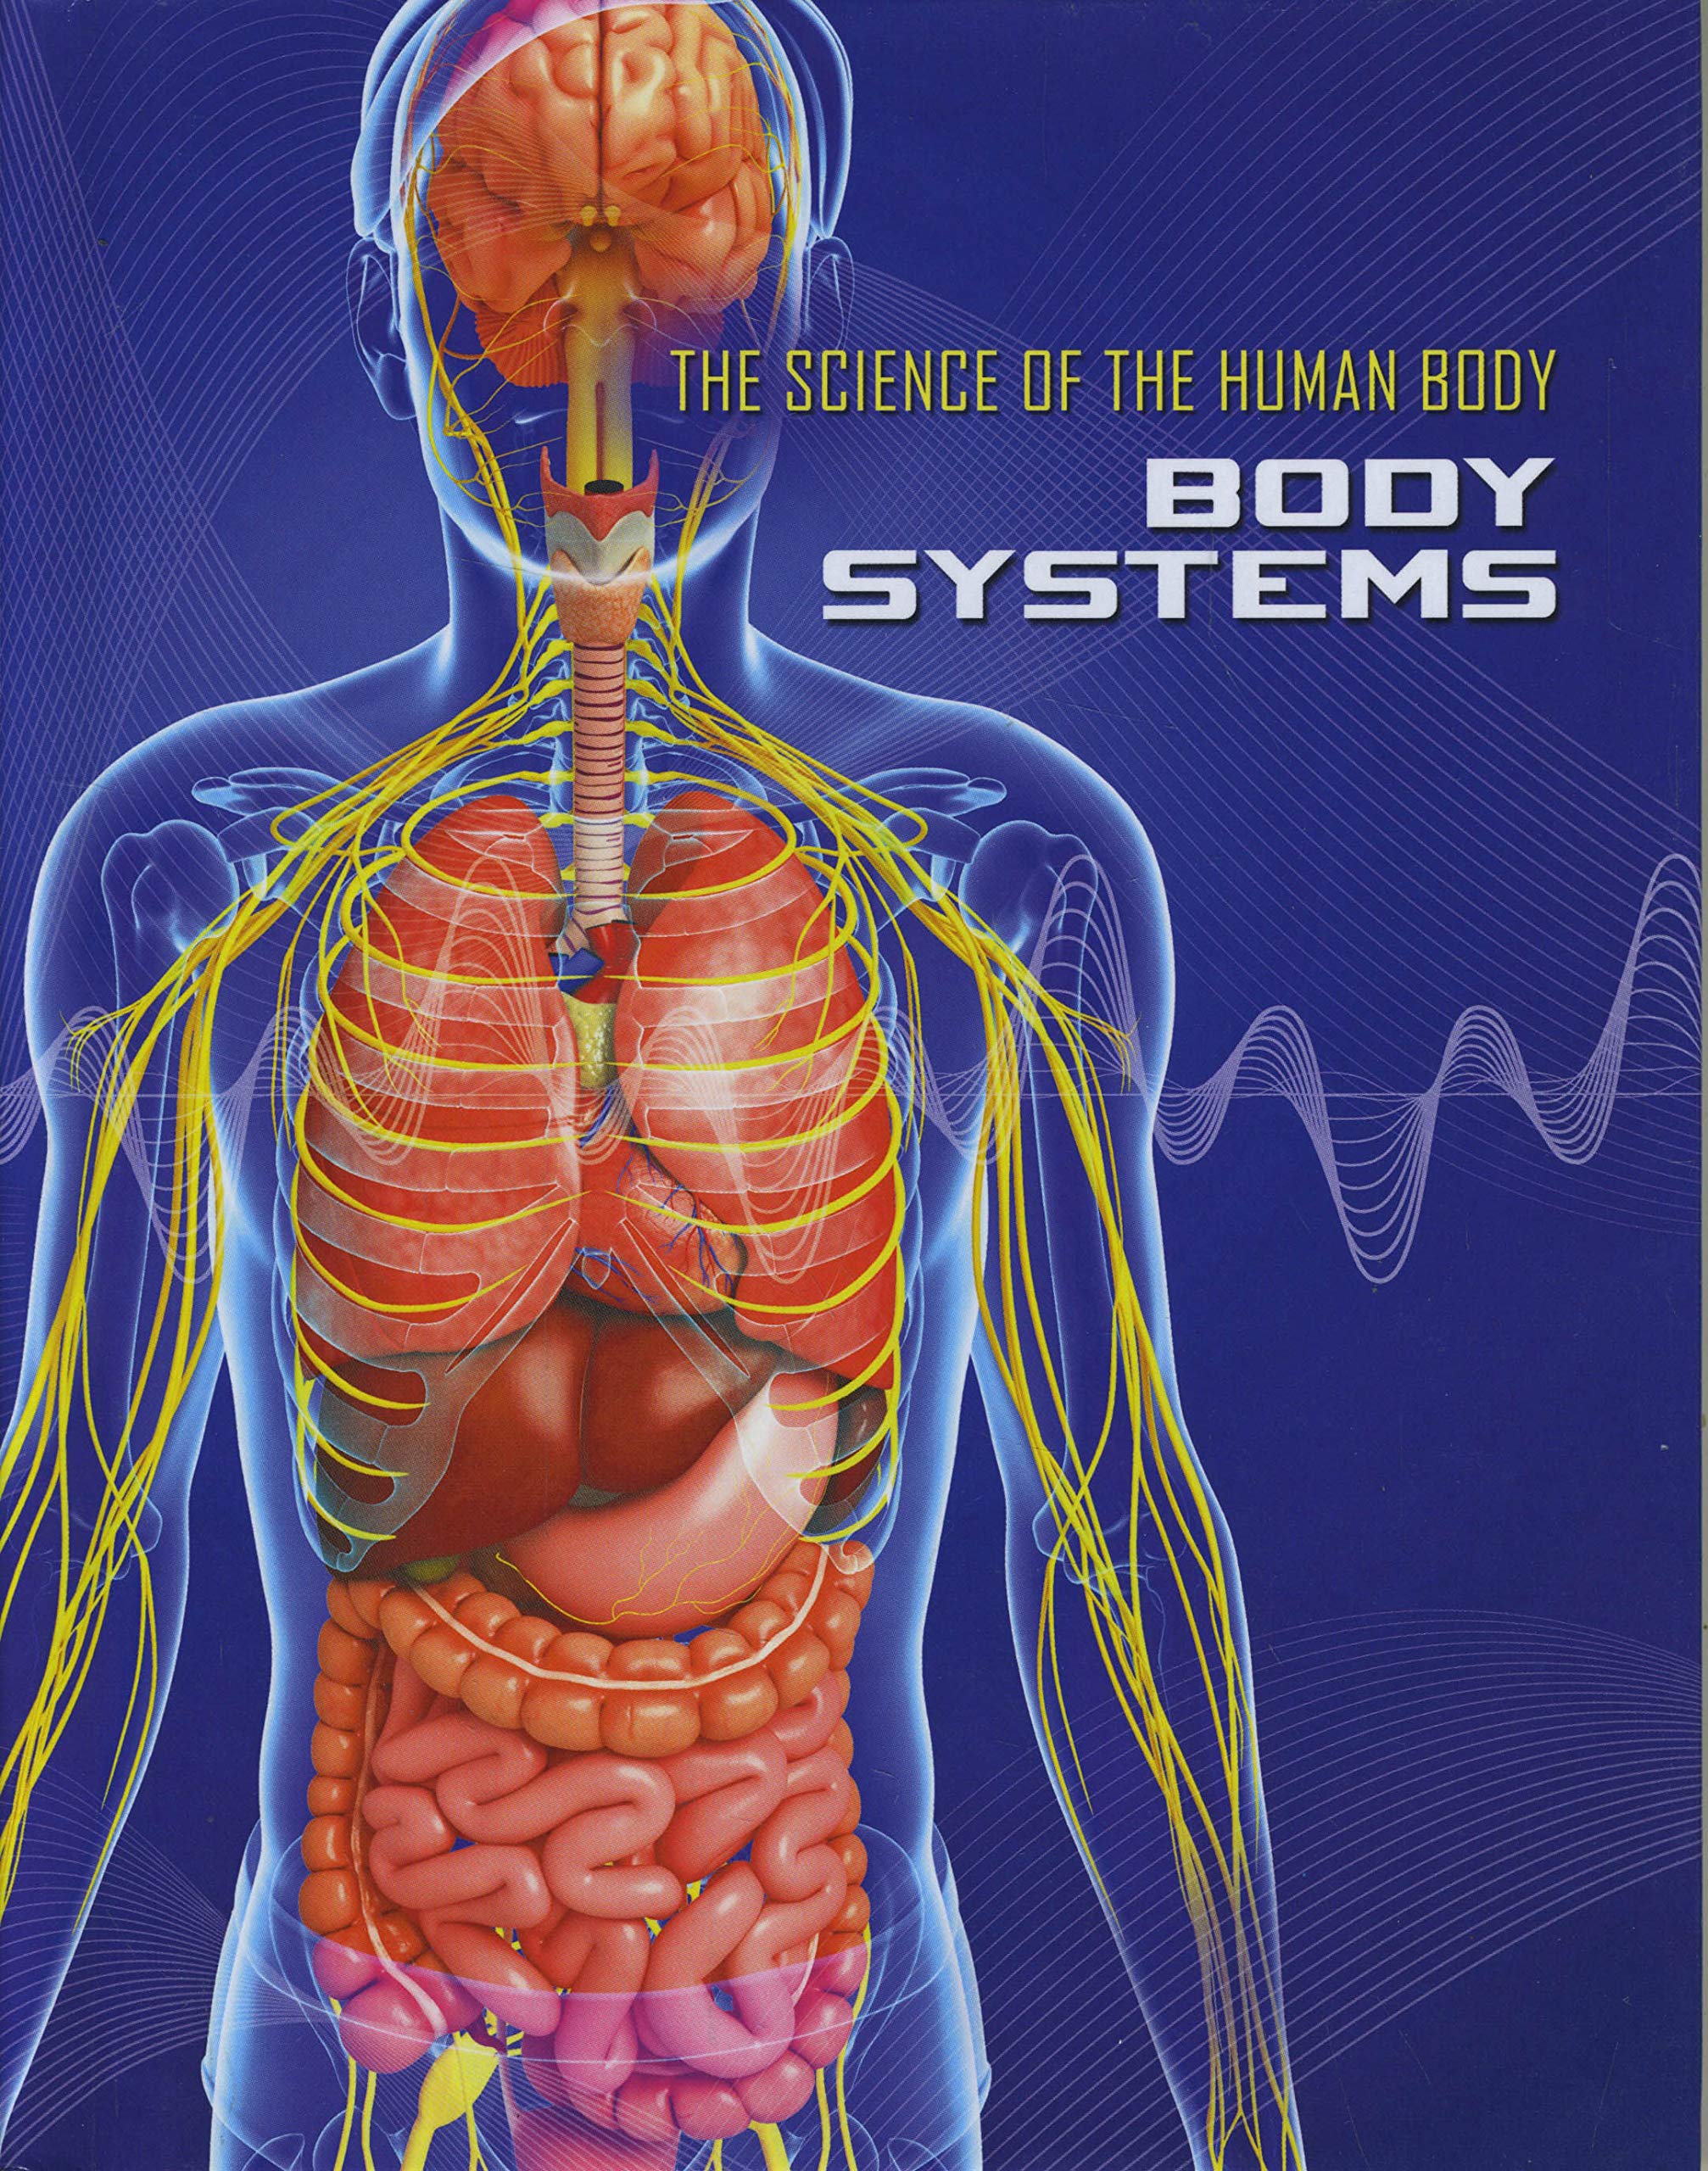 Human Body System Interactions | Science Quiz - Quizizz